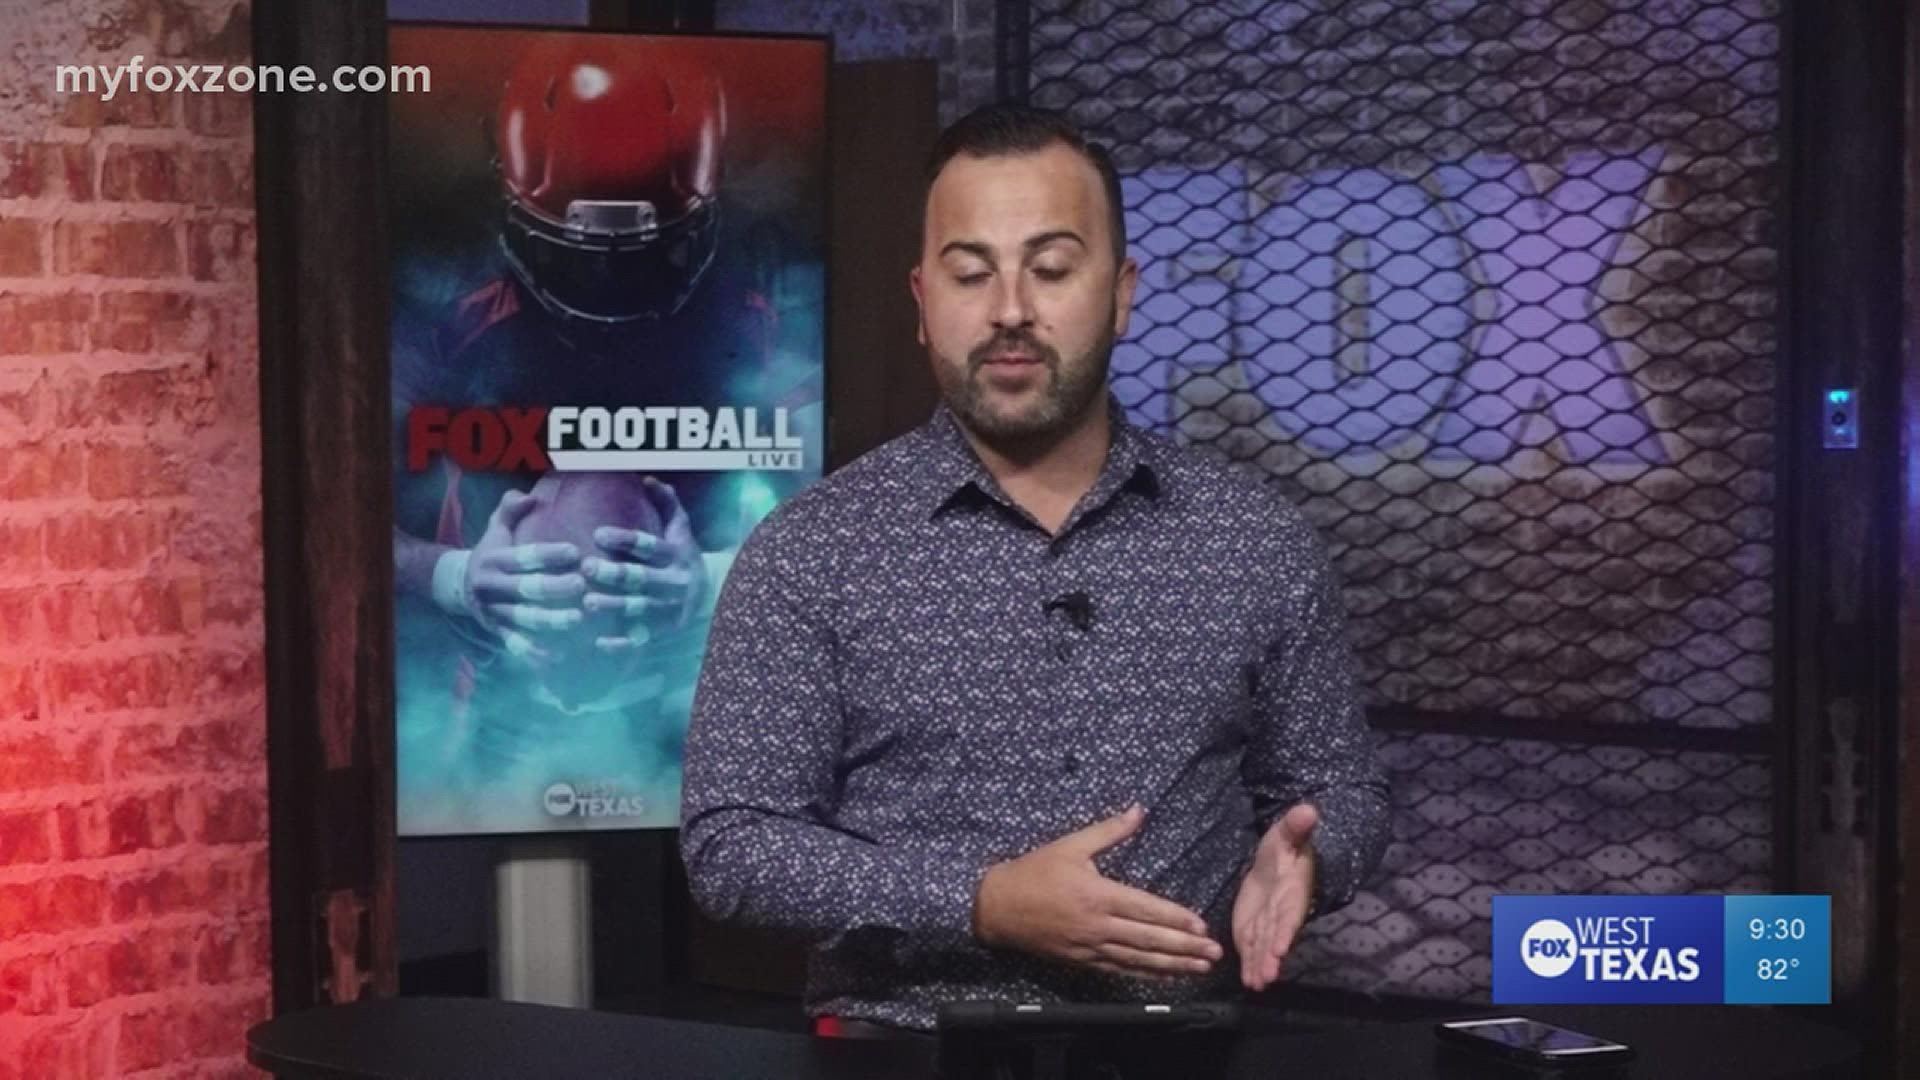 FOX Football Live is back for a third season full highlights, updates and more